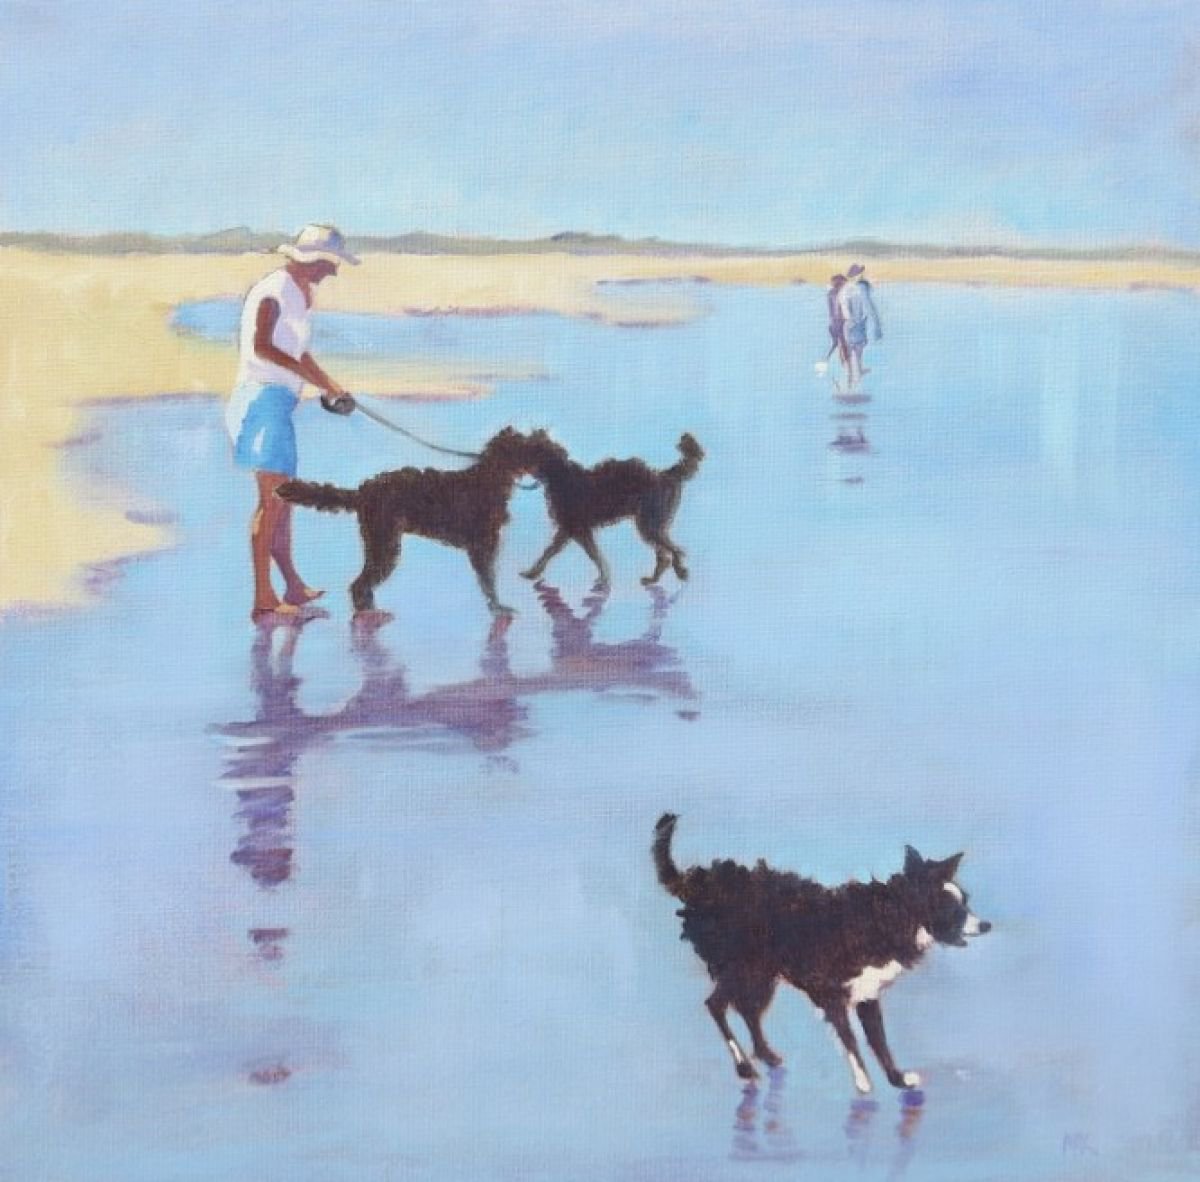 GRACE THE BORDER COLLIE IGNORING TWO DOGS by Mary Kemp